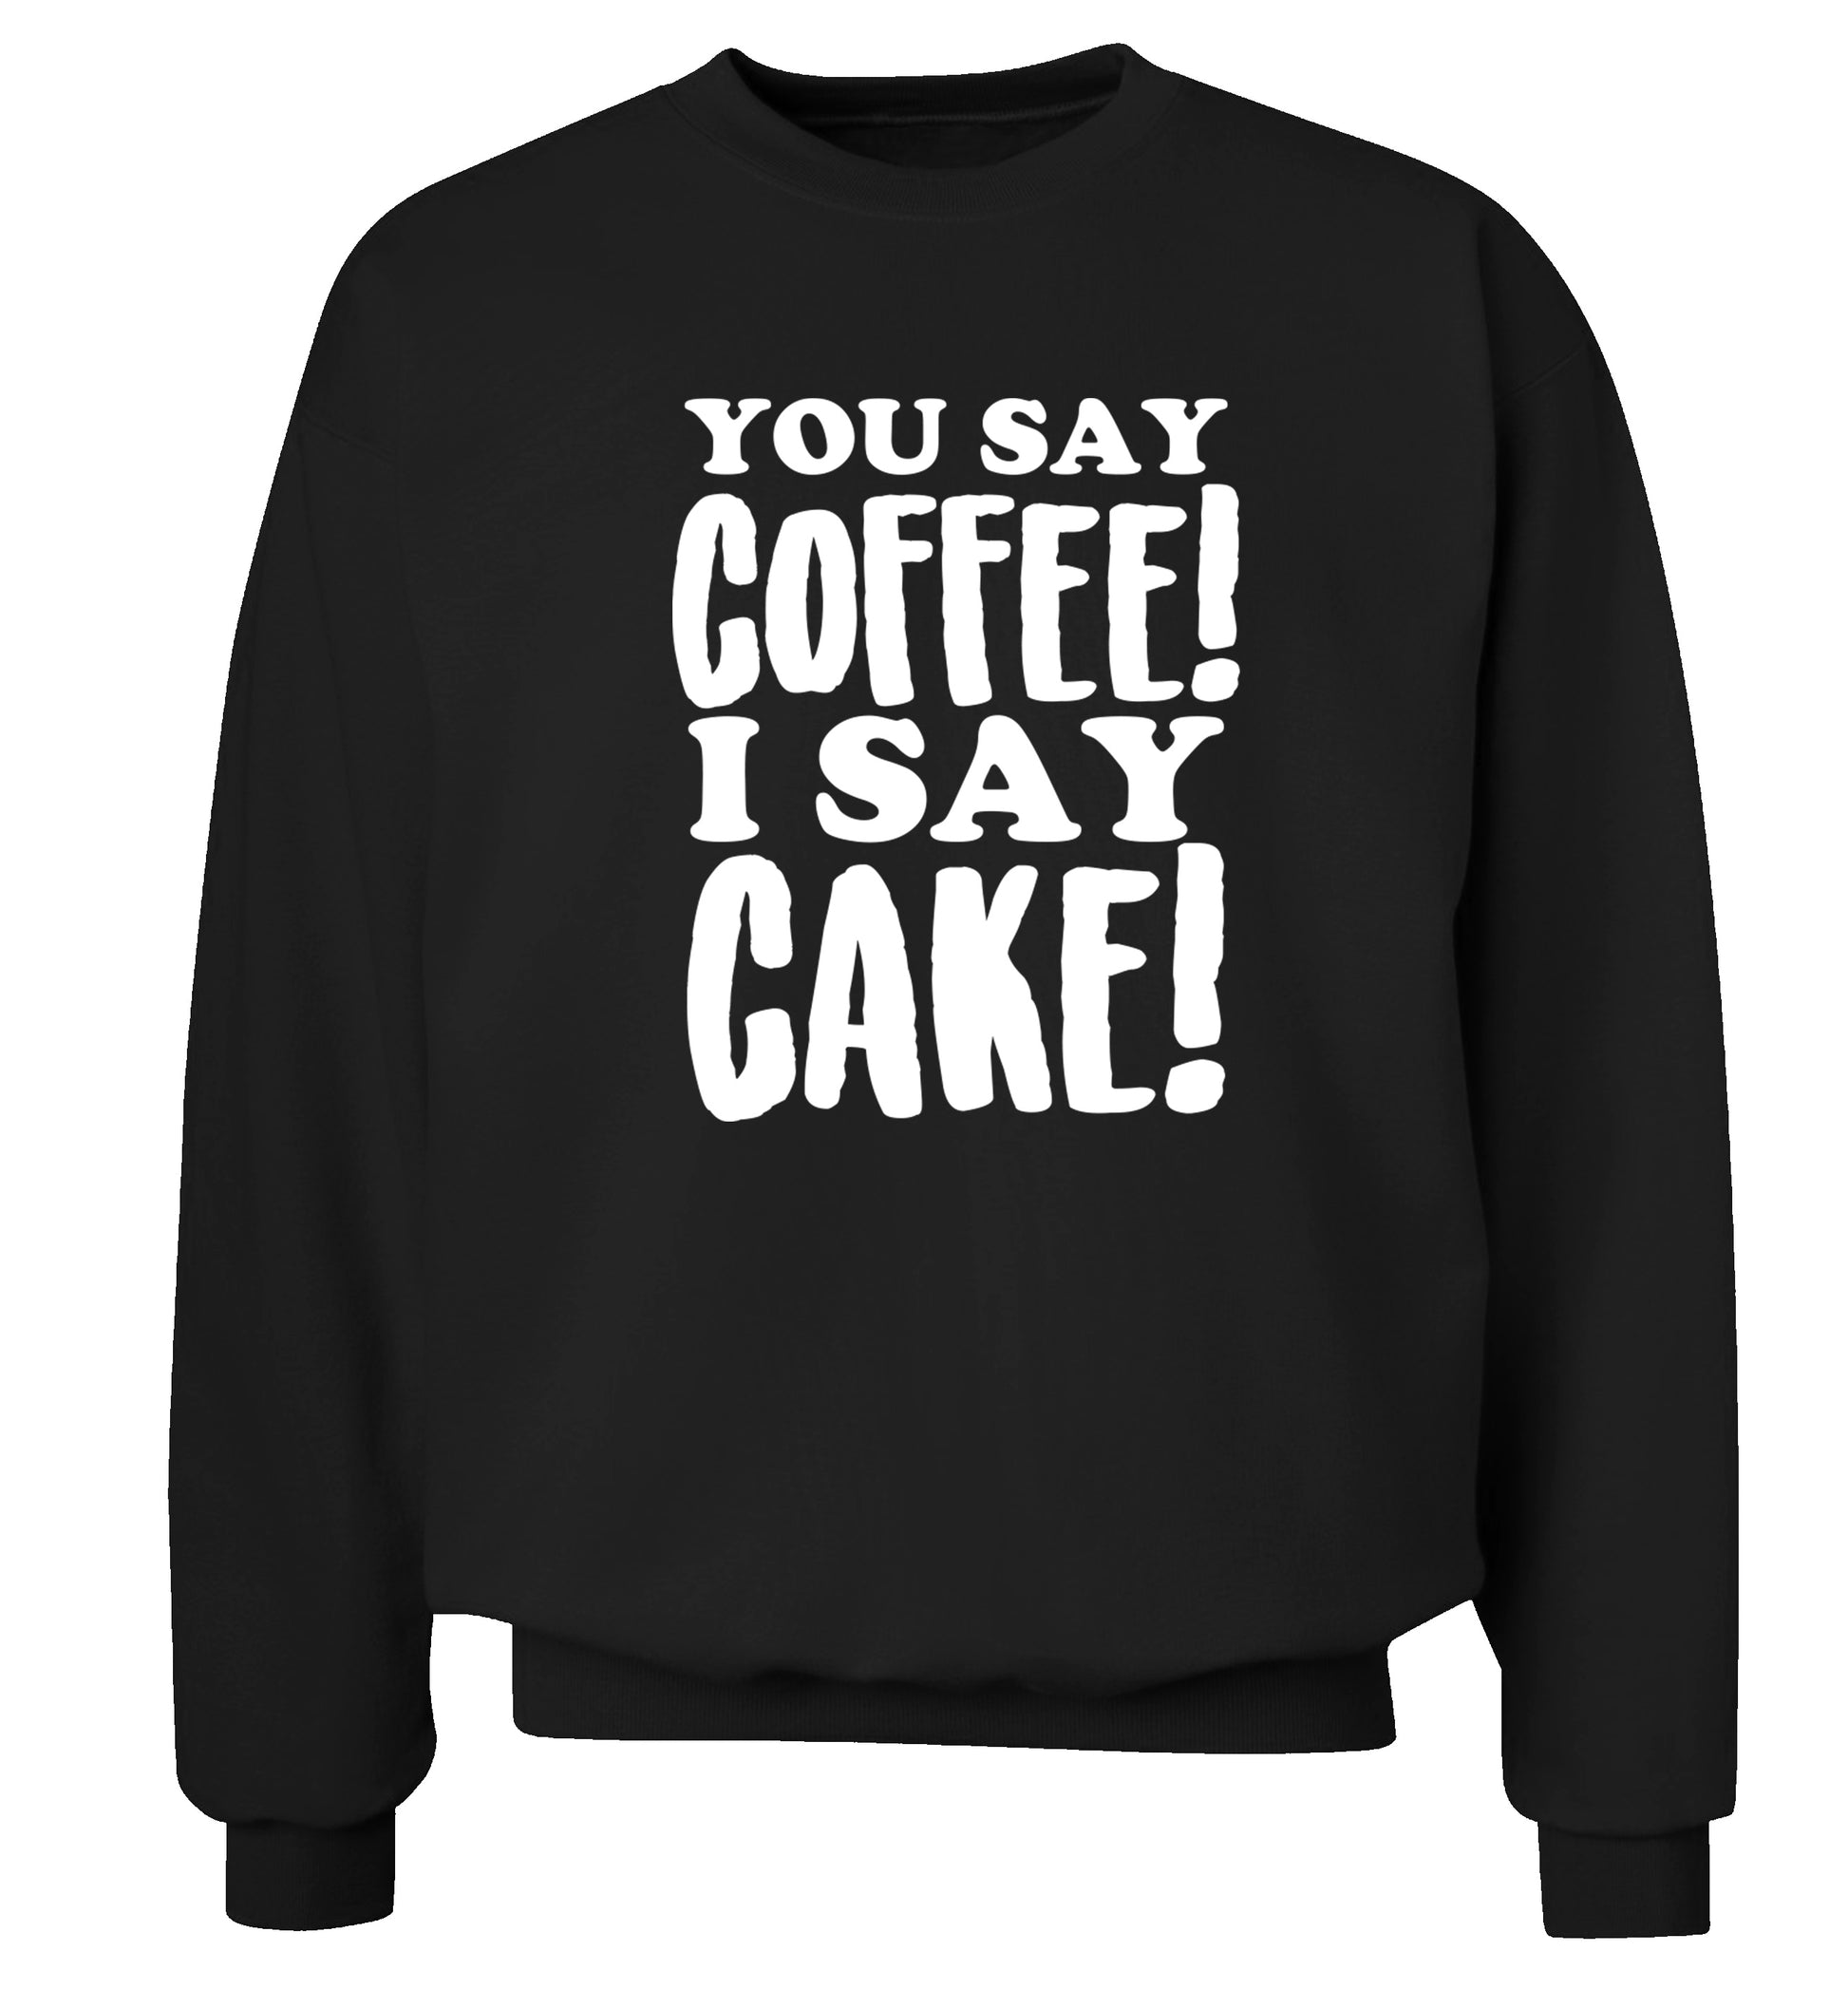 You say coffee I say cake! Adult's unisex black Sweater 2XL